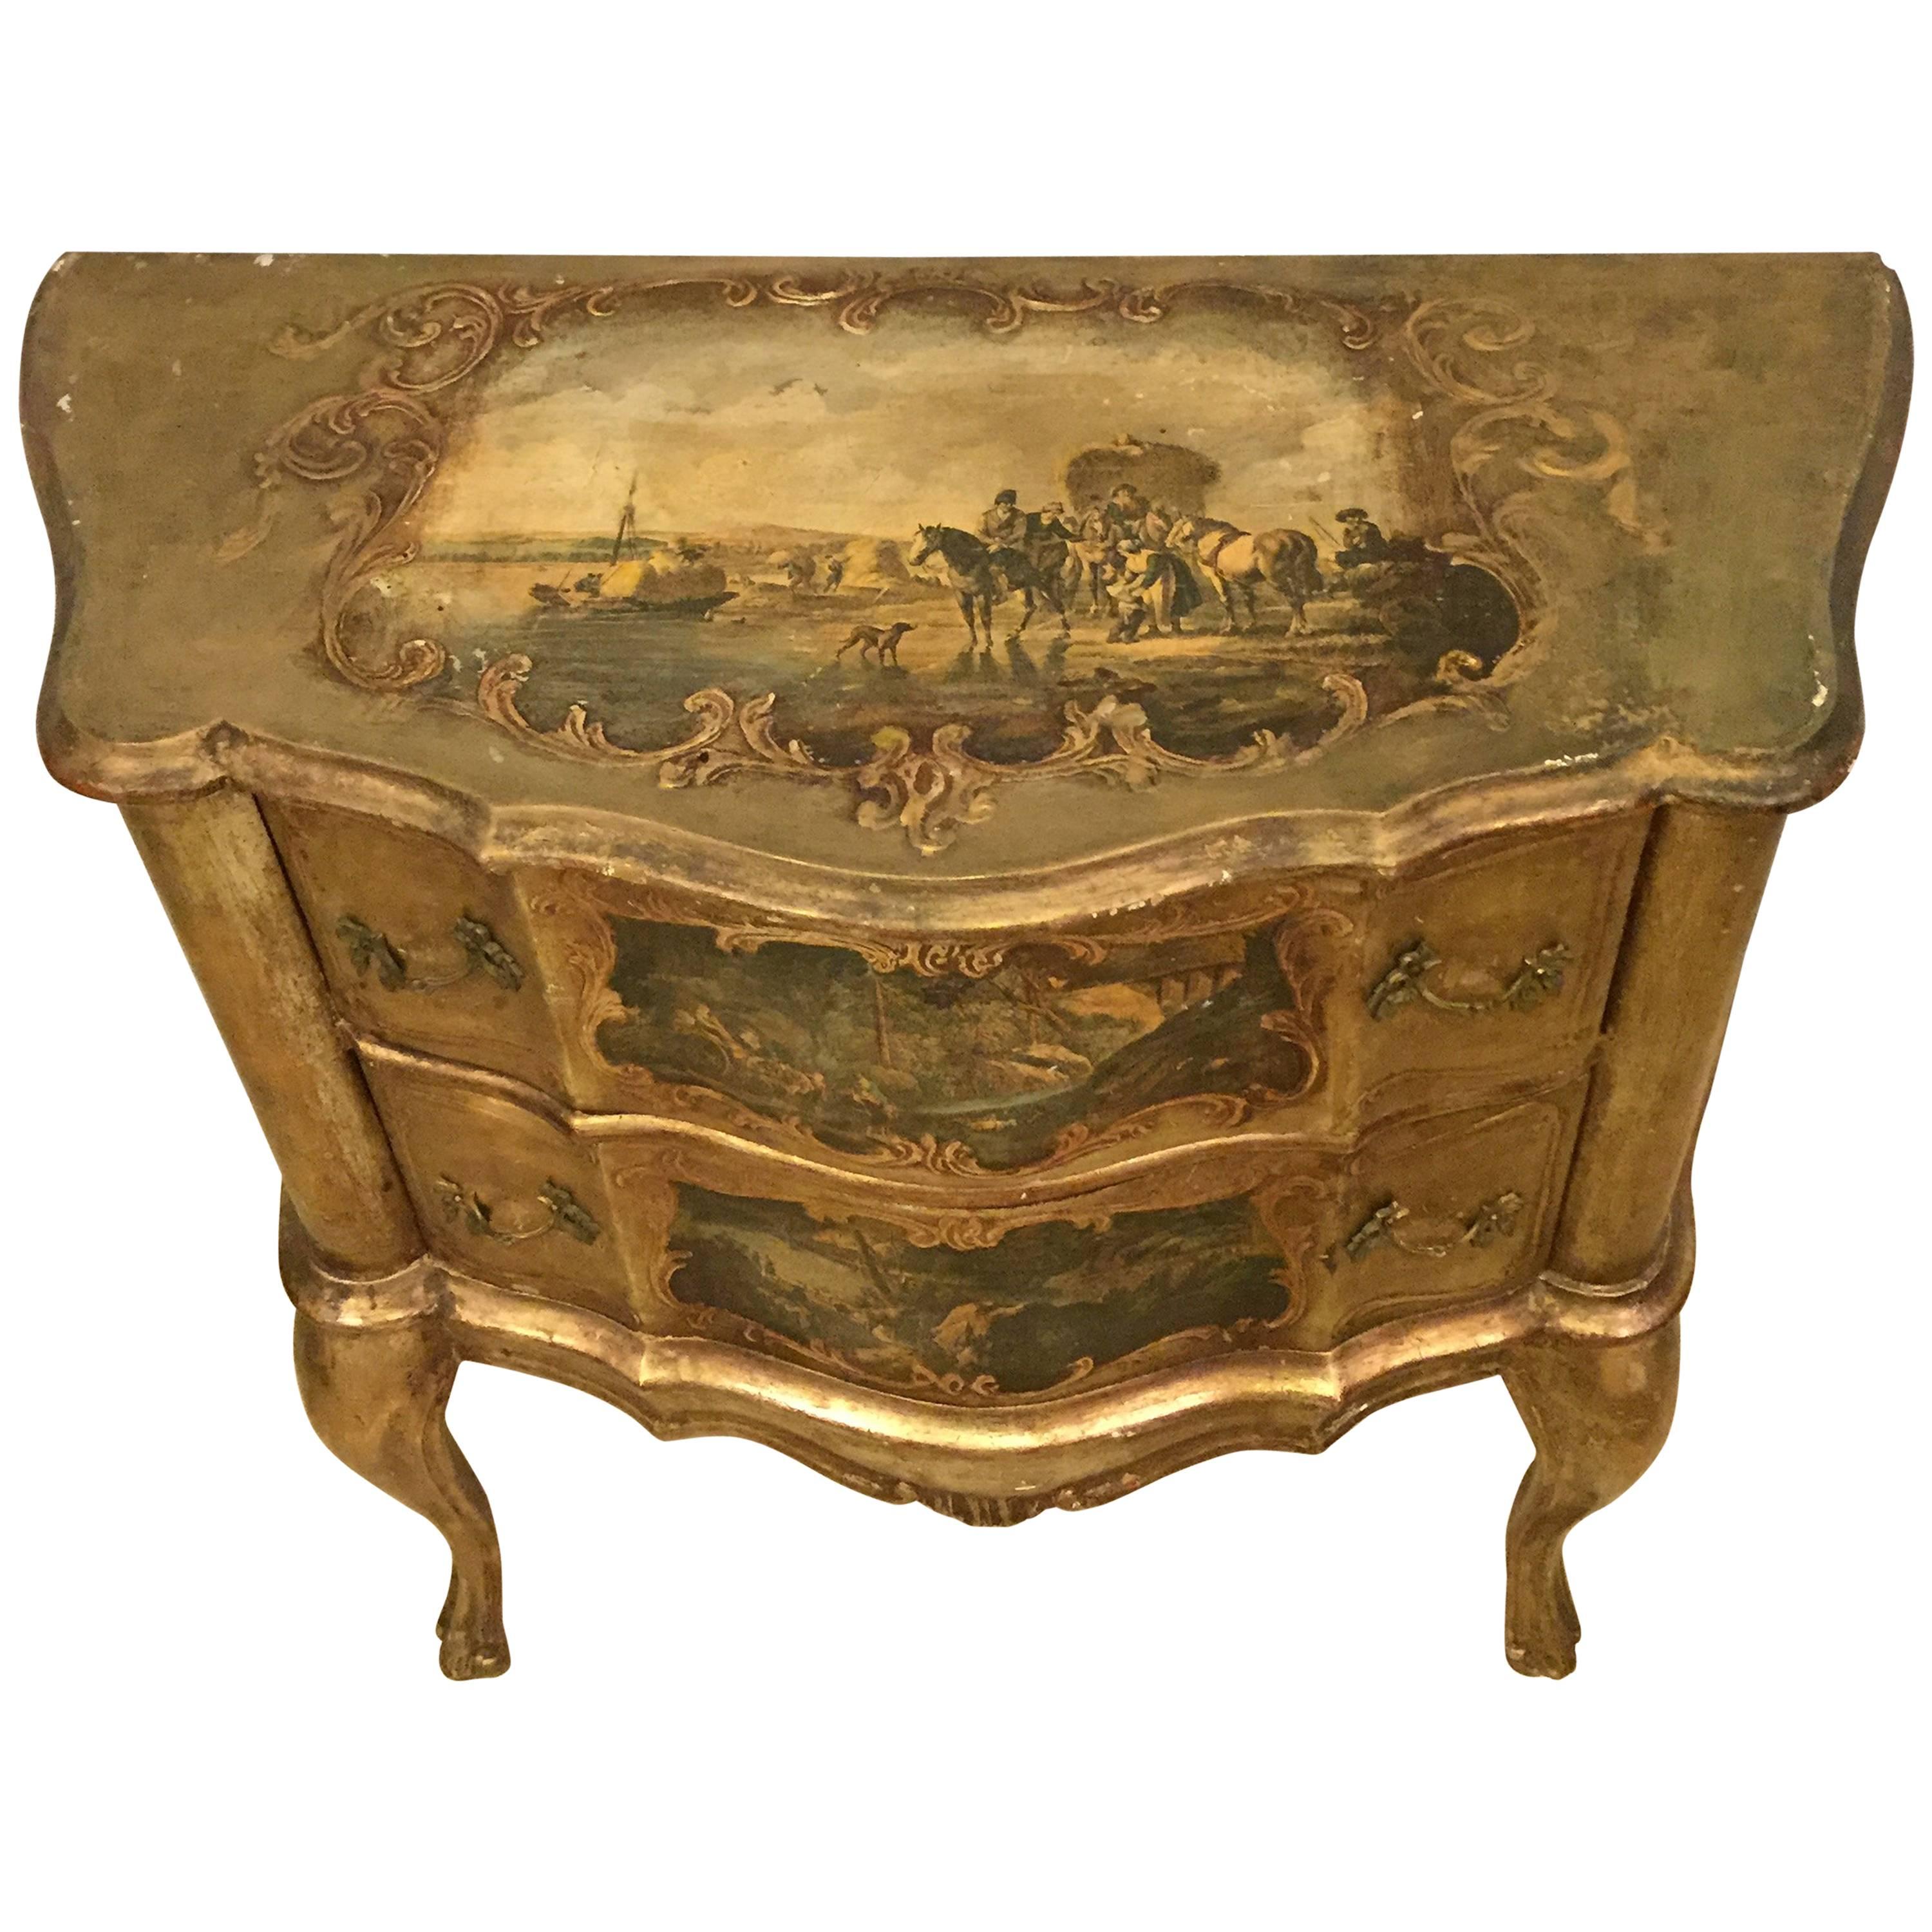 Small Italian Baroque Style Bombay Commode or Nightstand in Giltwood Finish